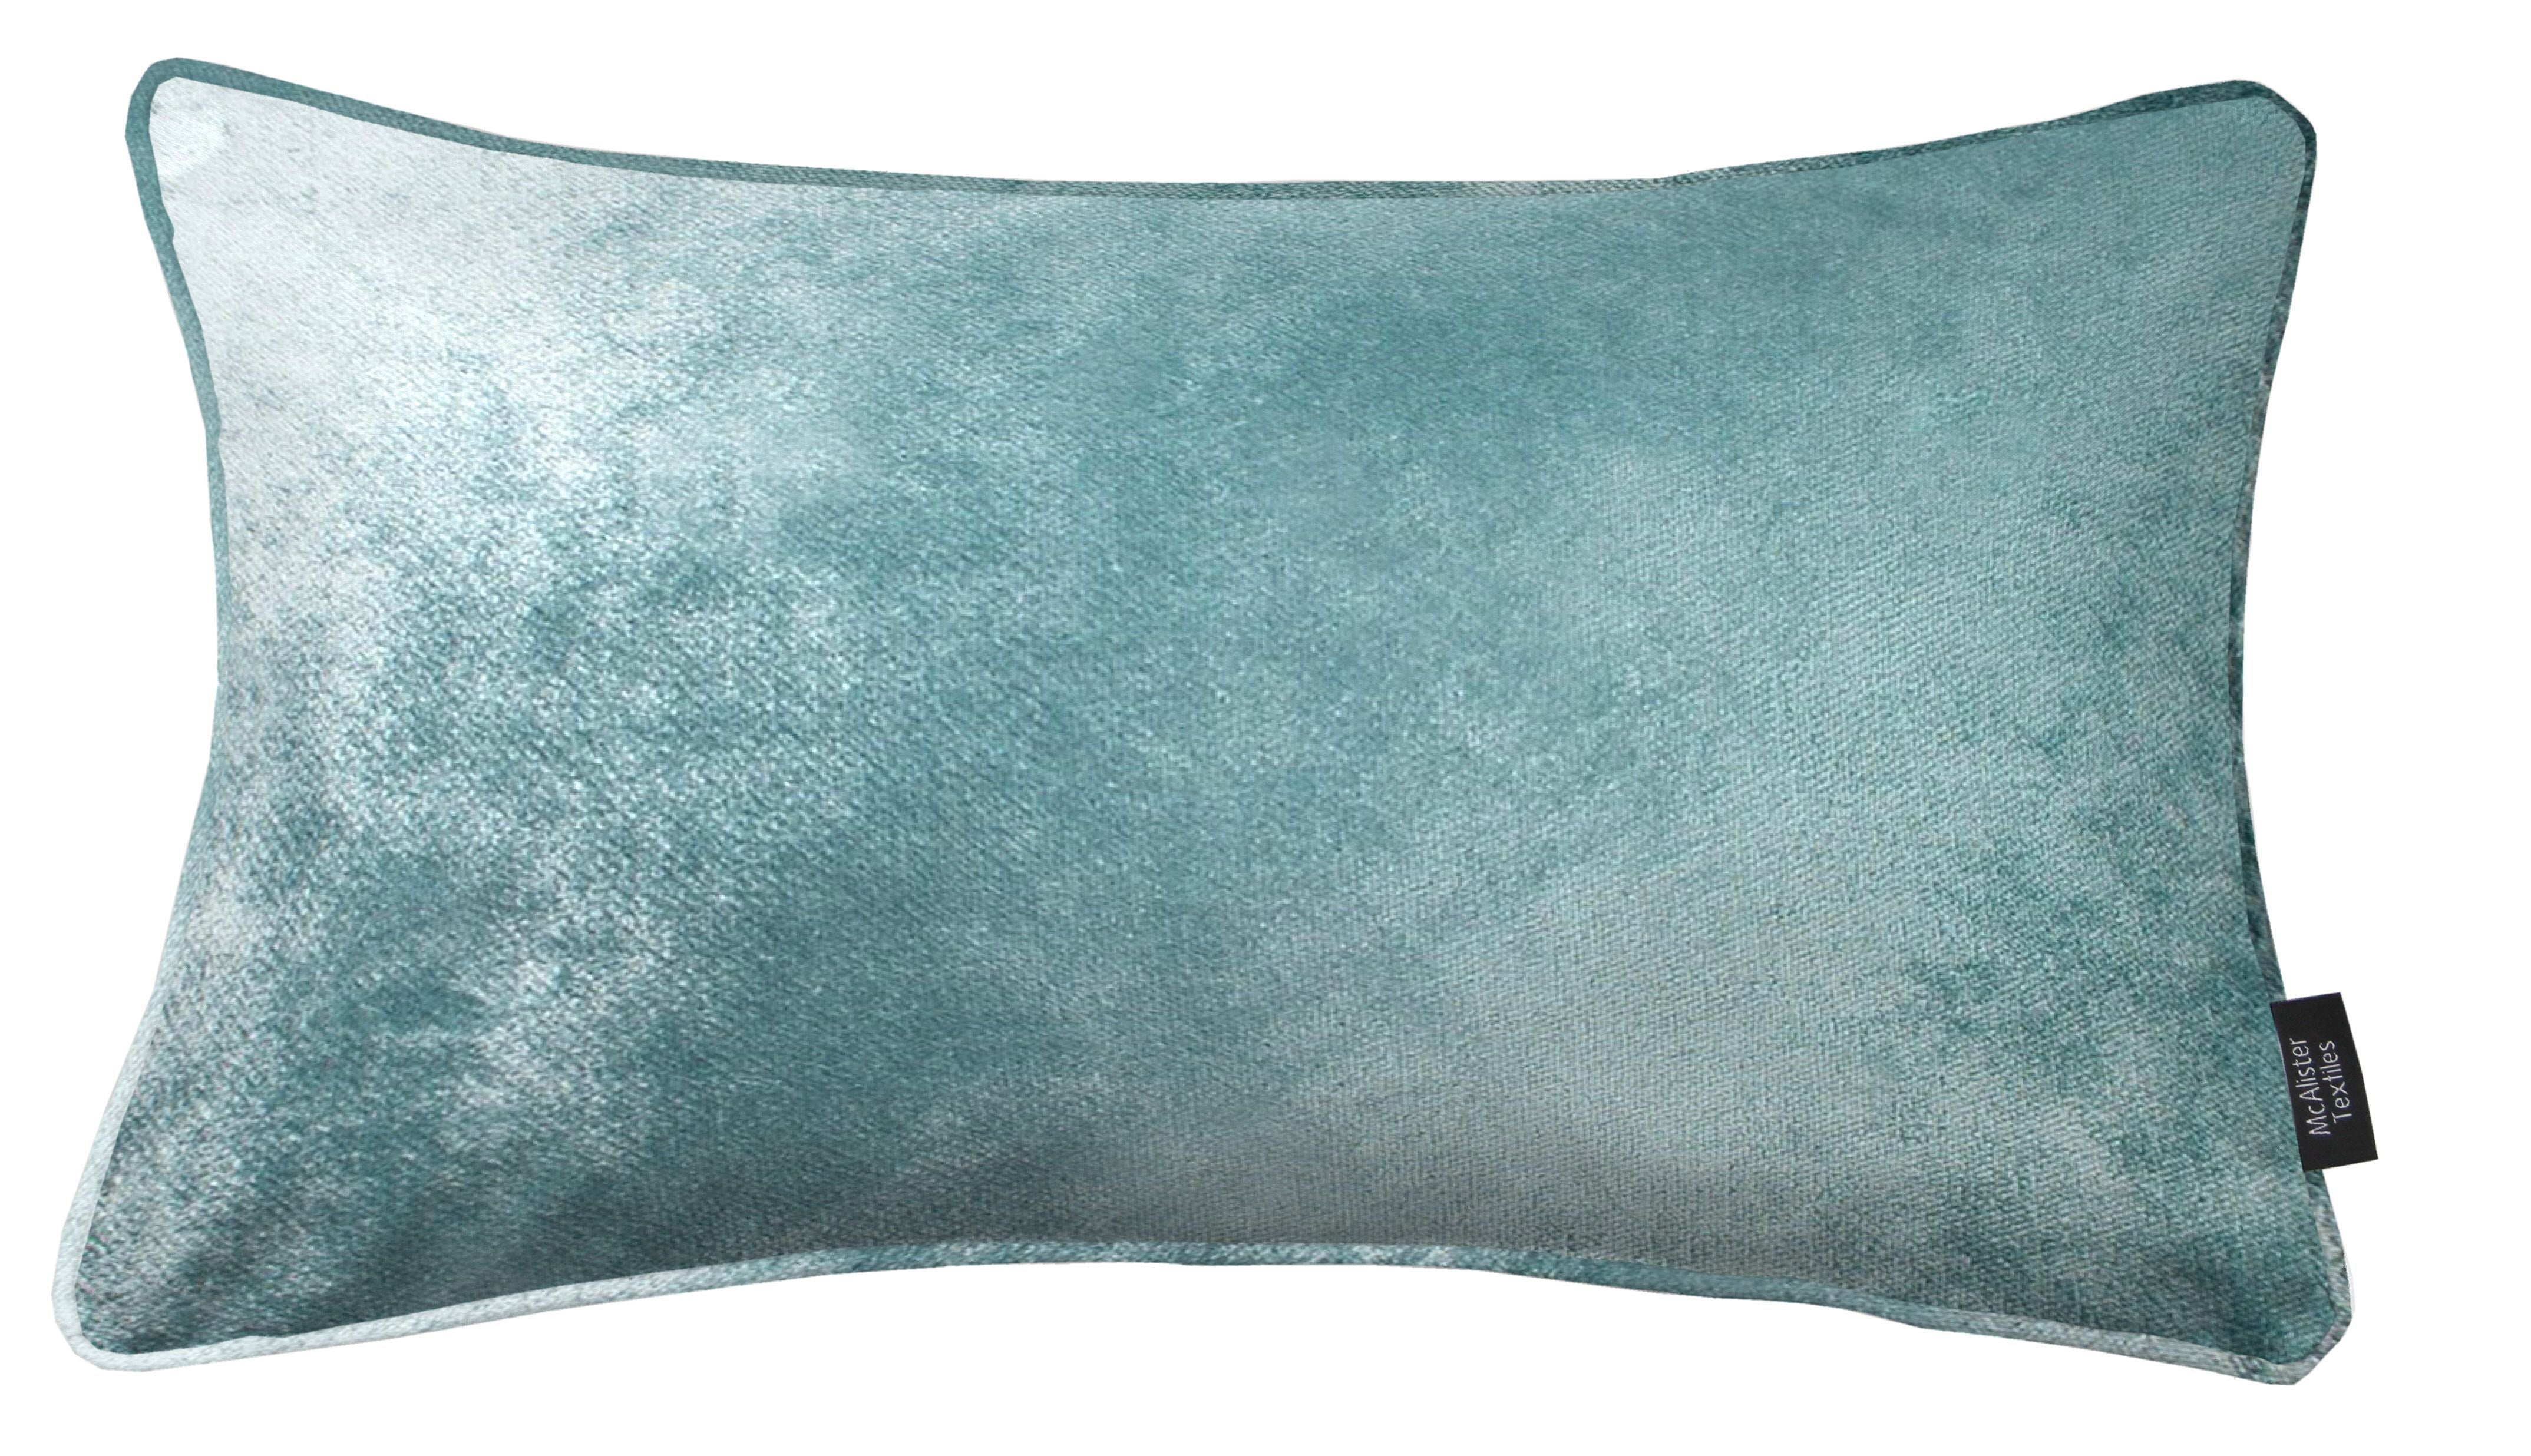 McAlister Textiles Duck Egg Blue Crushed Velvet Cushions Cushions and Covers Cover Only 50cm x 30cm 